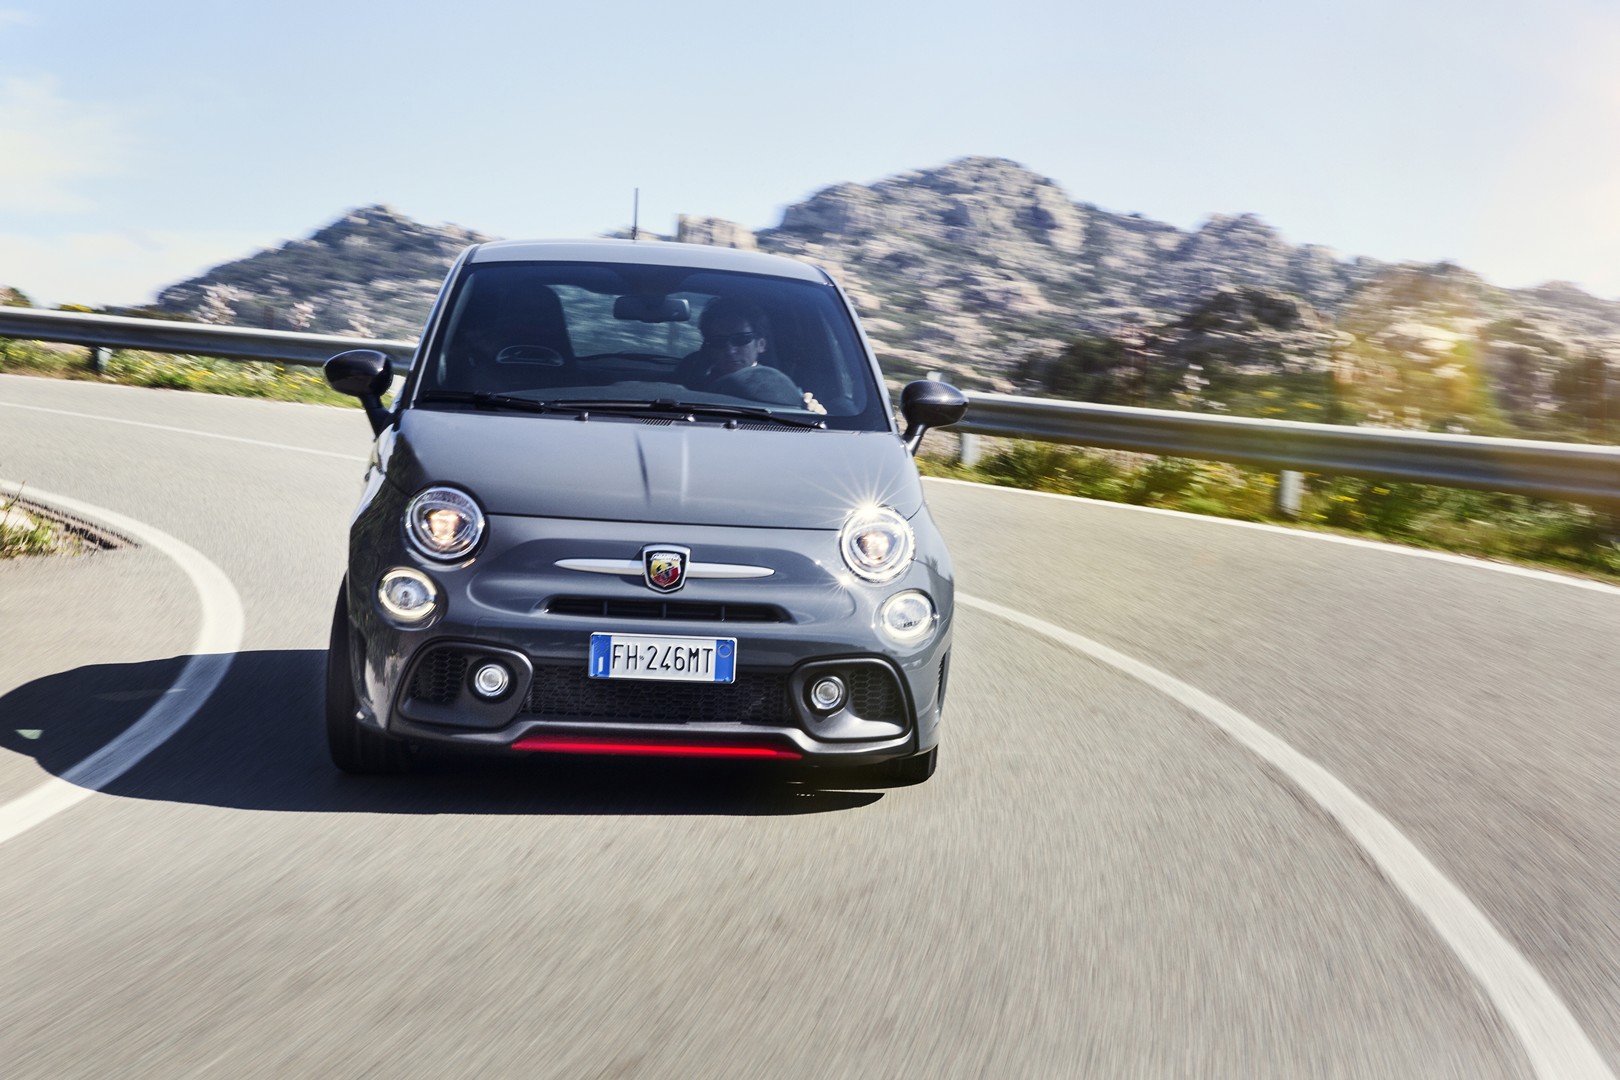 Abarth 595 Pista and 695 XSR Yamaha Photos Will Have Fiat 